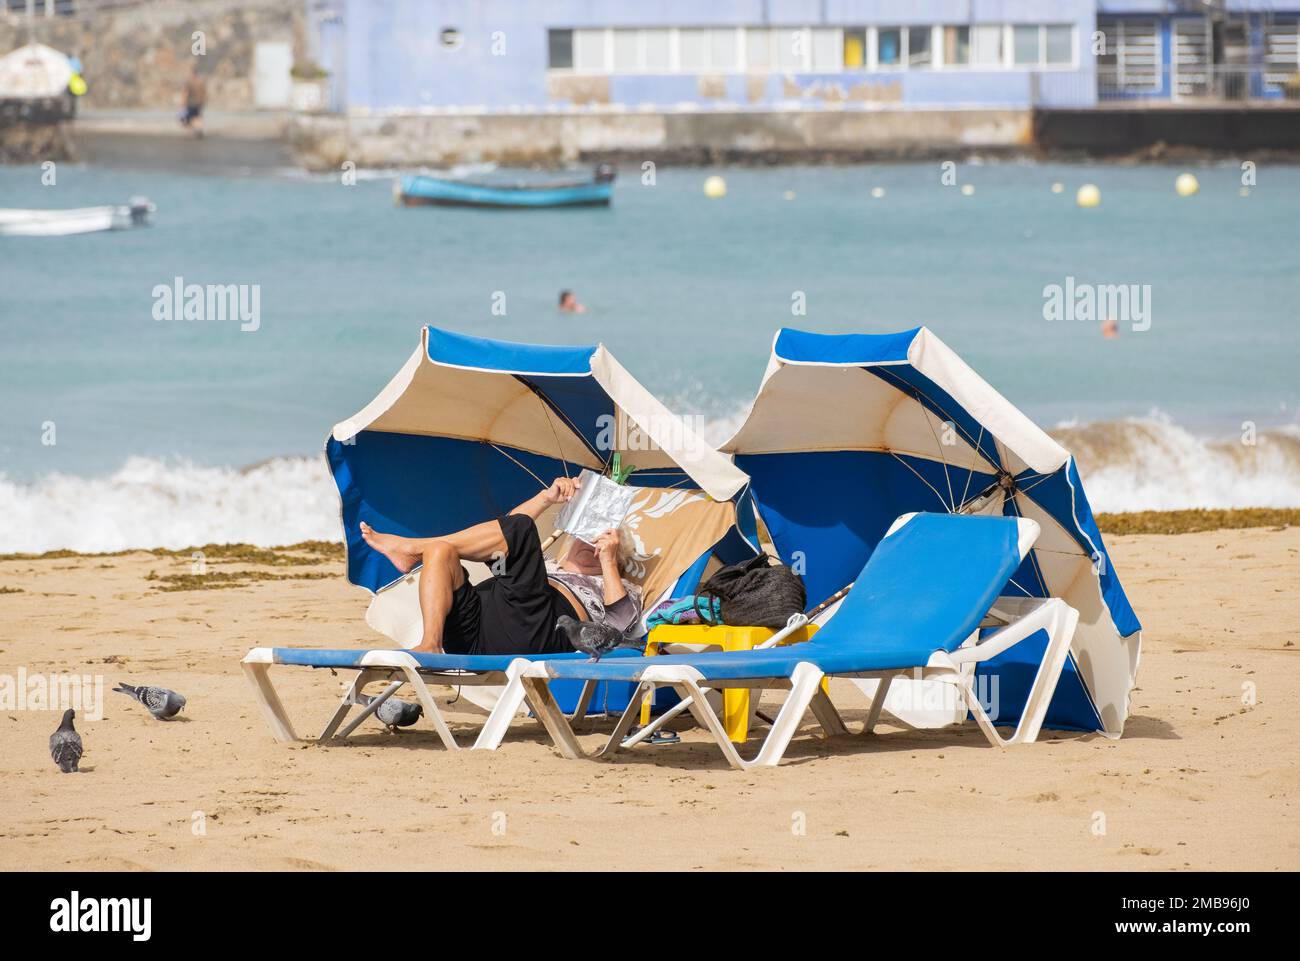 Las Palmas, Gran Canaria, Canary Islands, Spain. 20th January 2023. Cooler weather for British tourists on the city beach in Las Palmas on Gran Canaria as a cold front brings rain, strong winds, and lower temperatures to the Canary Islands. Credit: Alan Dawson/Alamy Live News Stock Photo